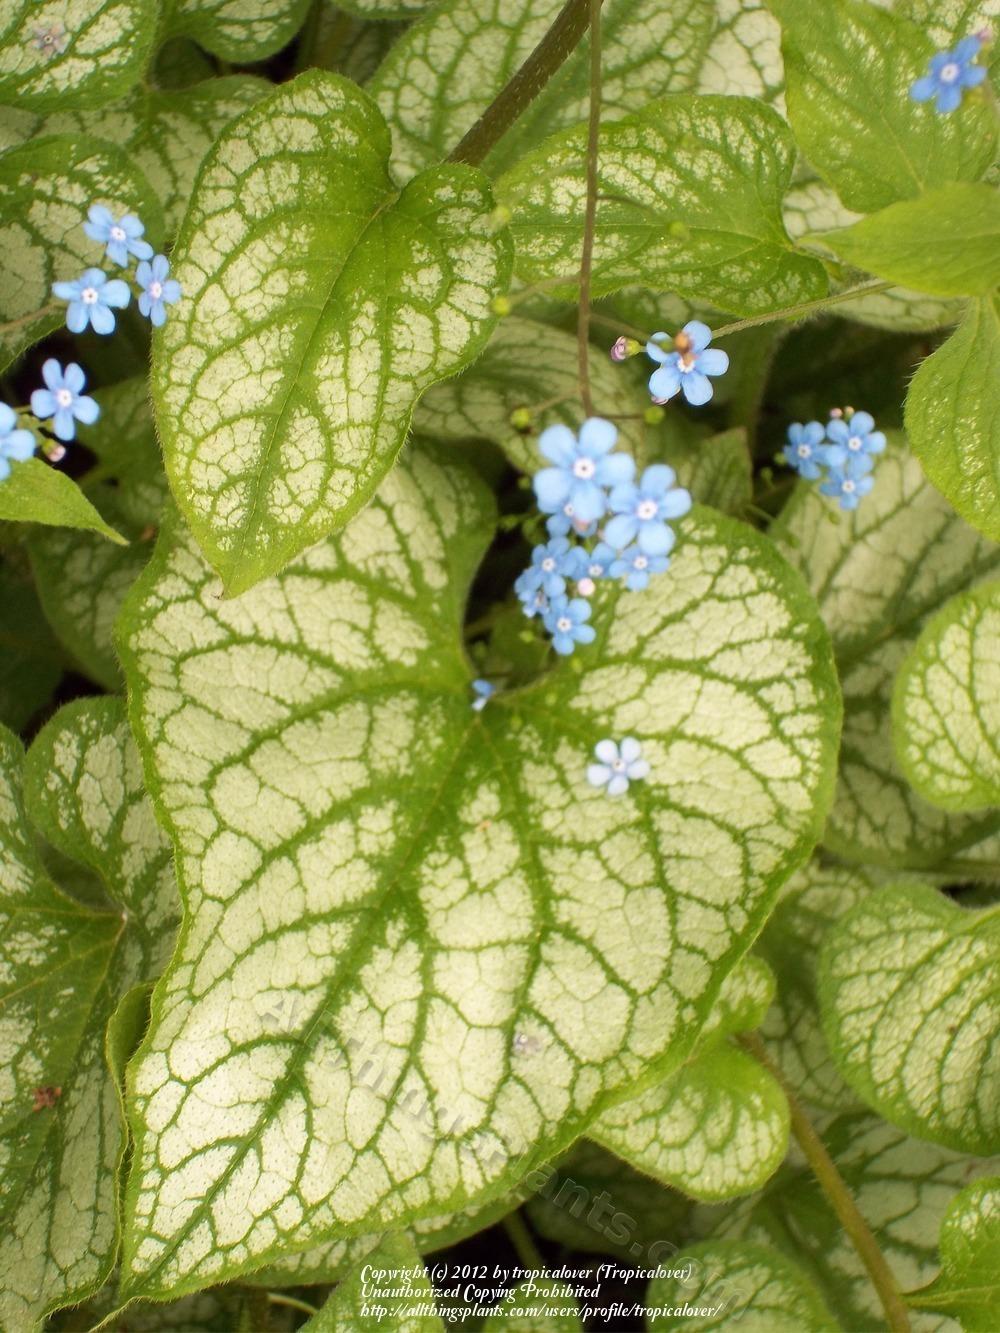 Photo of Silver Siberian bugloss (Brunnera macrophylla 'Jack Frost') uploaded by tropicalover